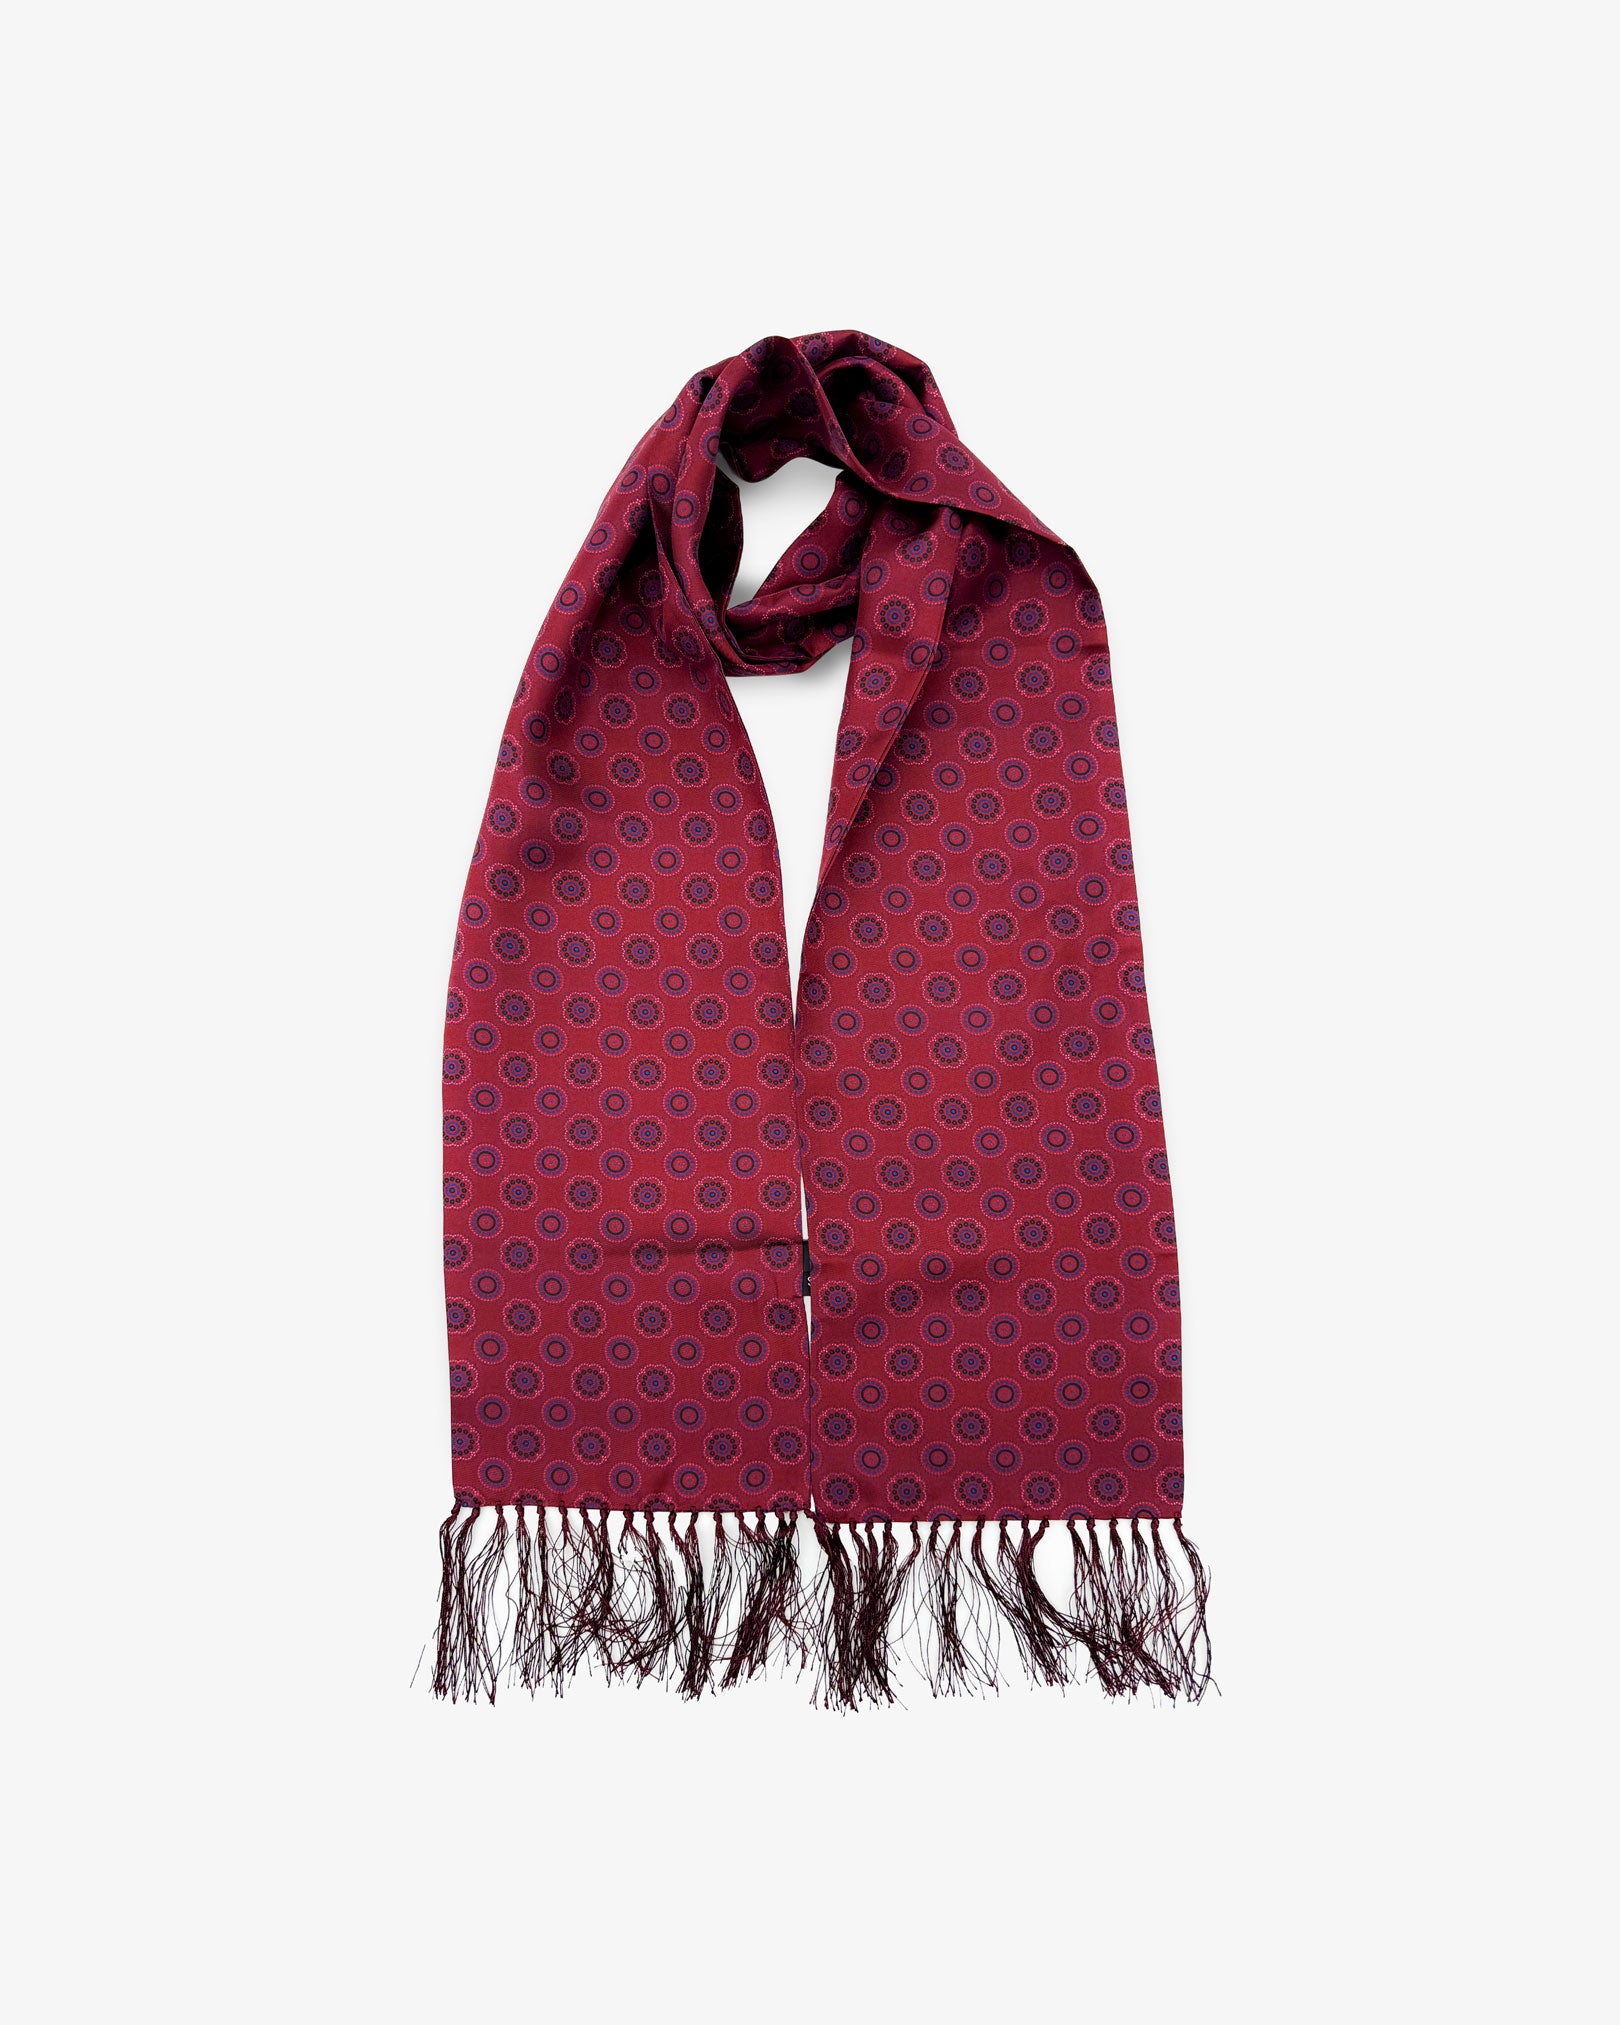 The Seattle pure silk aviator scarf looped in middle with both ends parallel showing the dark burgundy red with circle pattern and SOHO branding label.